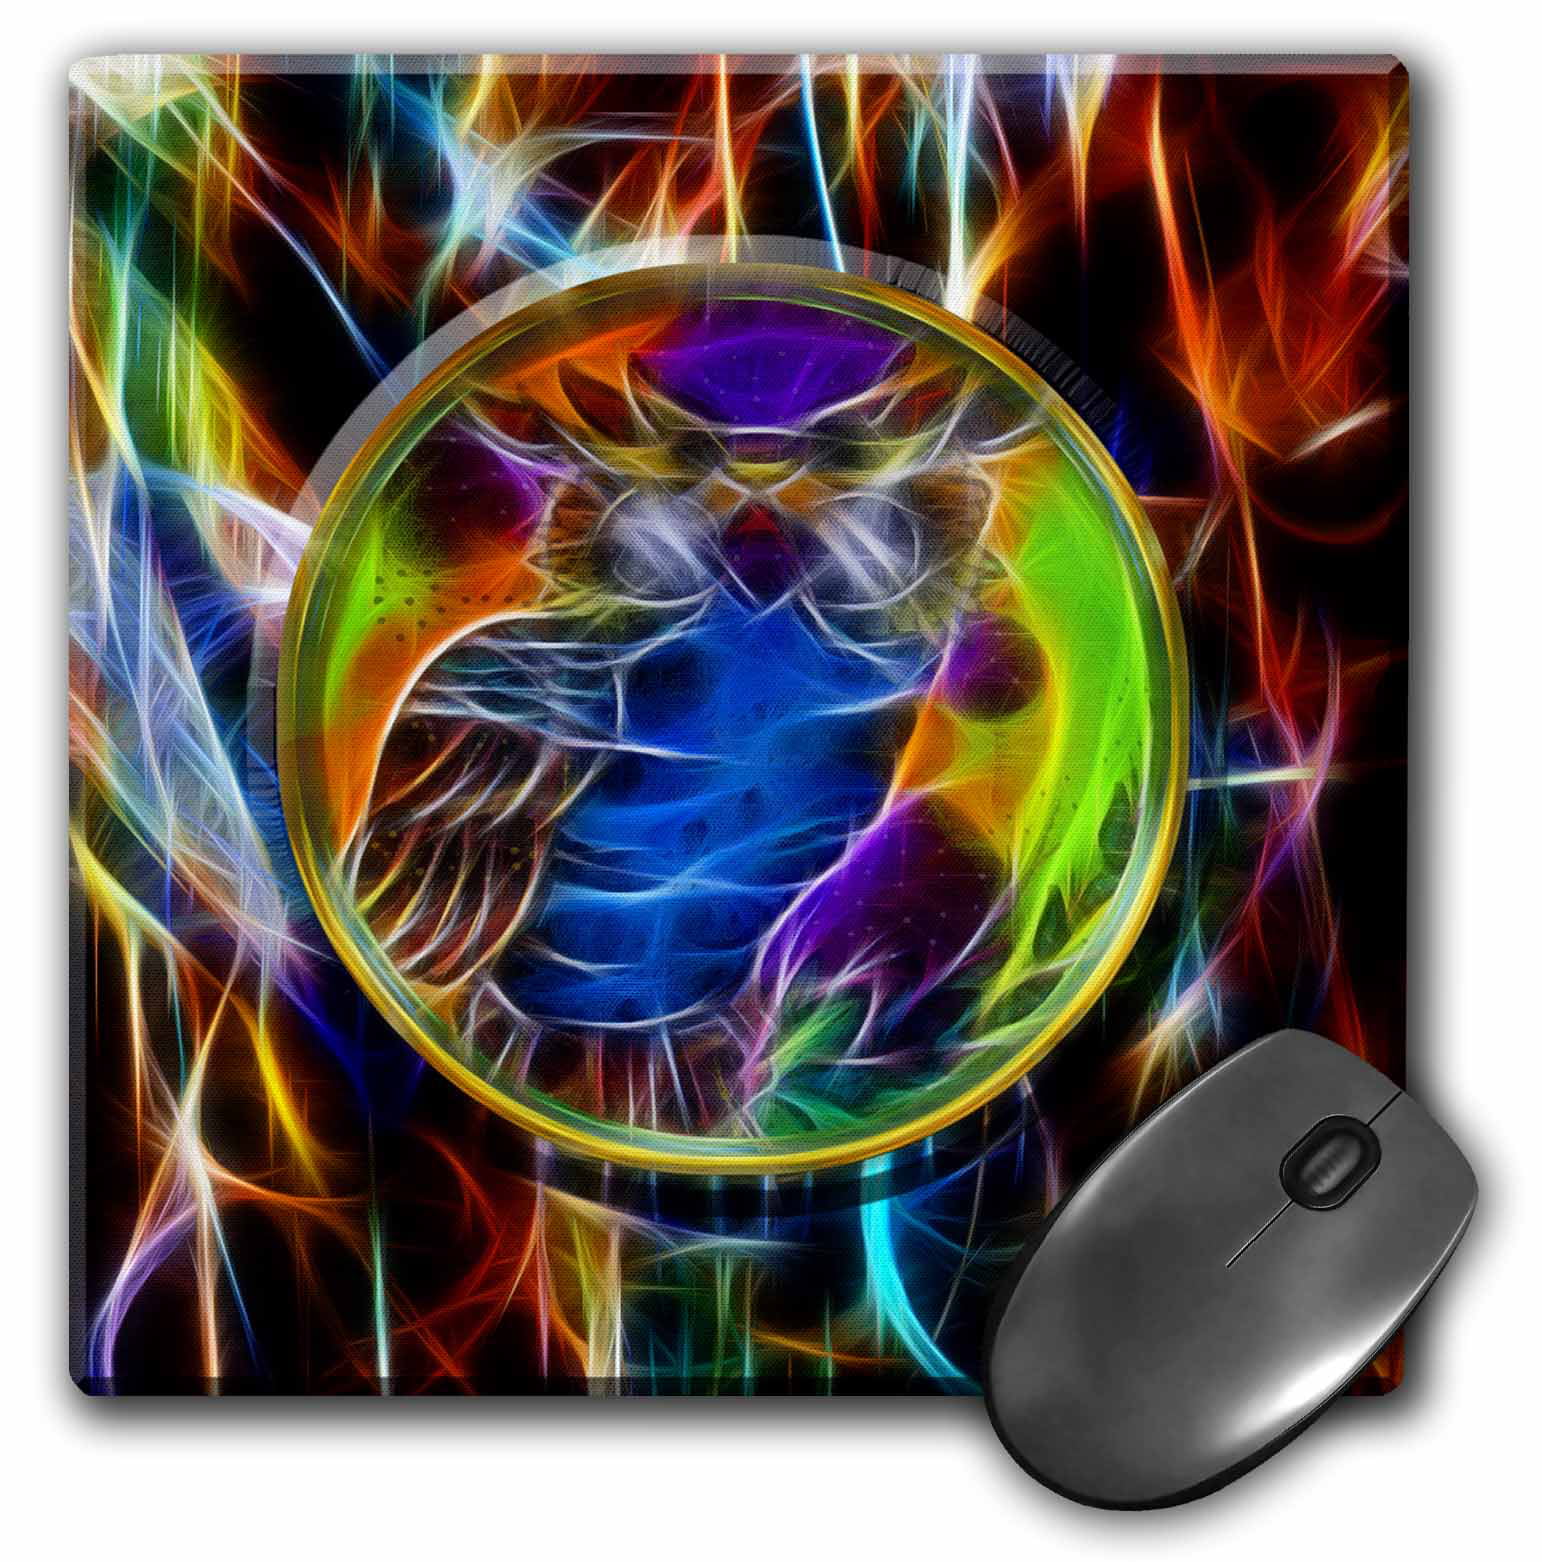 3dRose Wise old owl neon abstract art, Mouse Pad, 8 by 8 inches ...